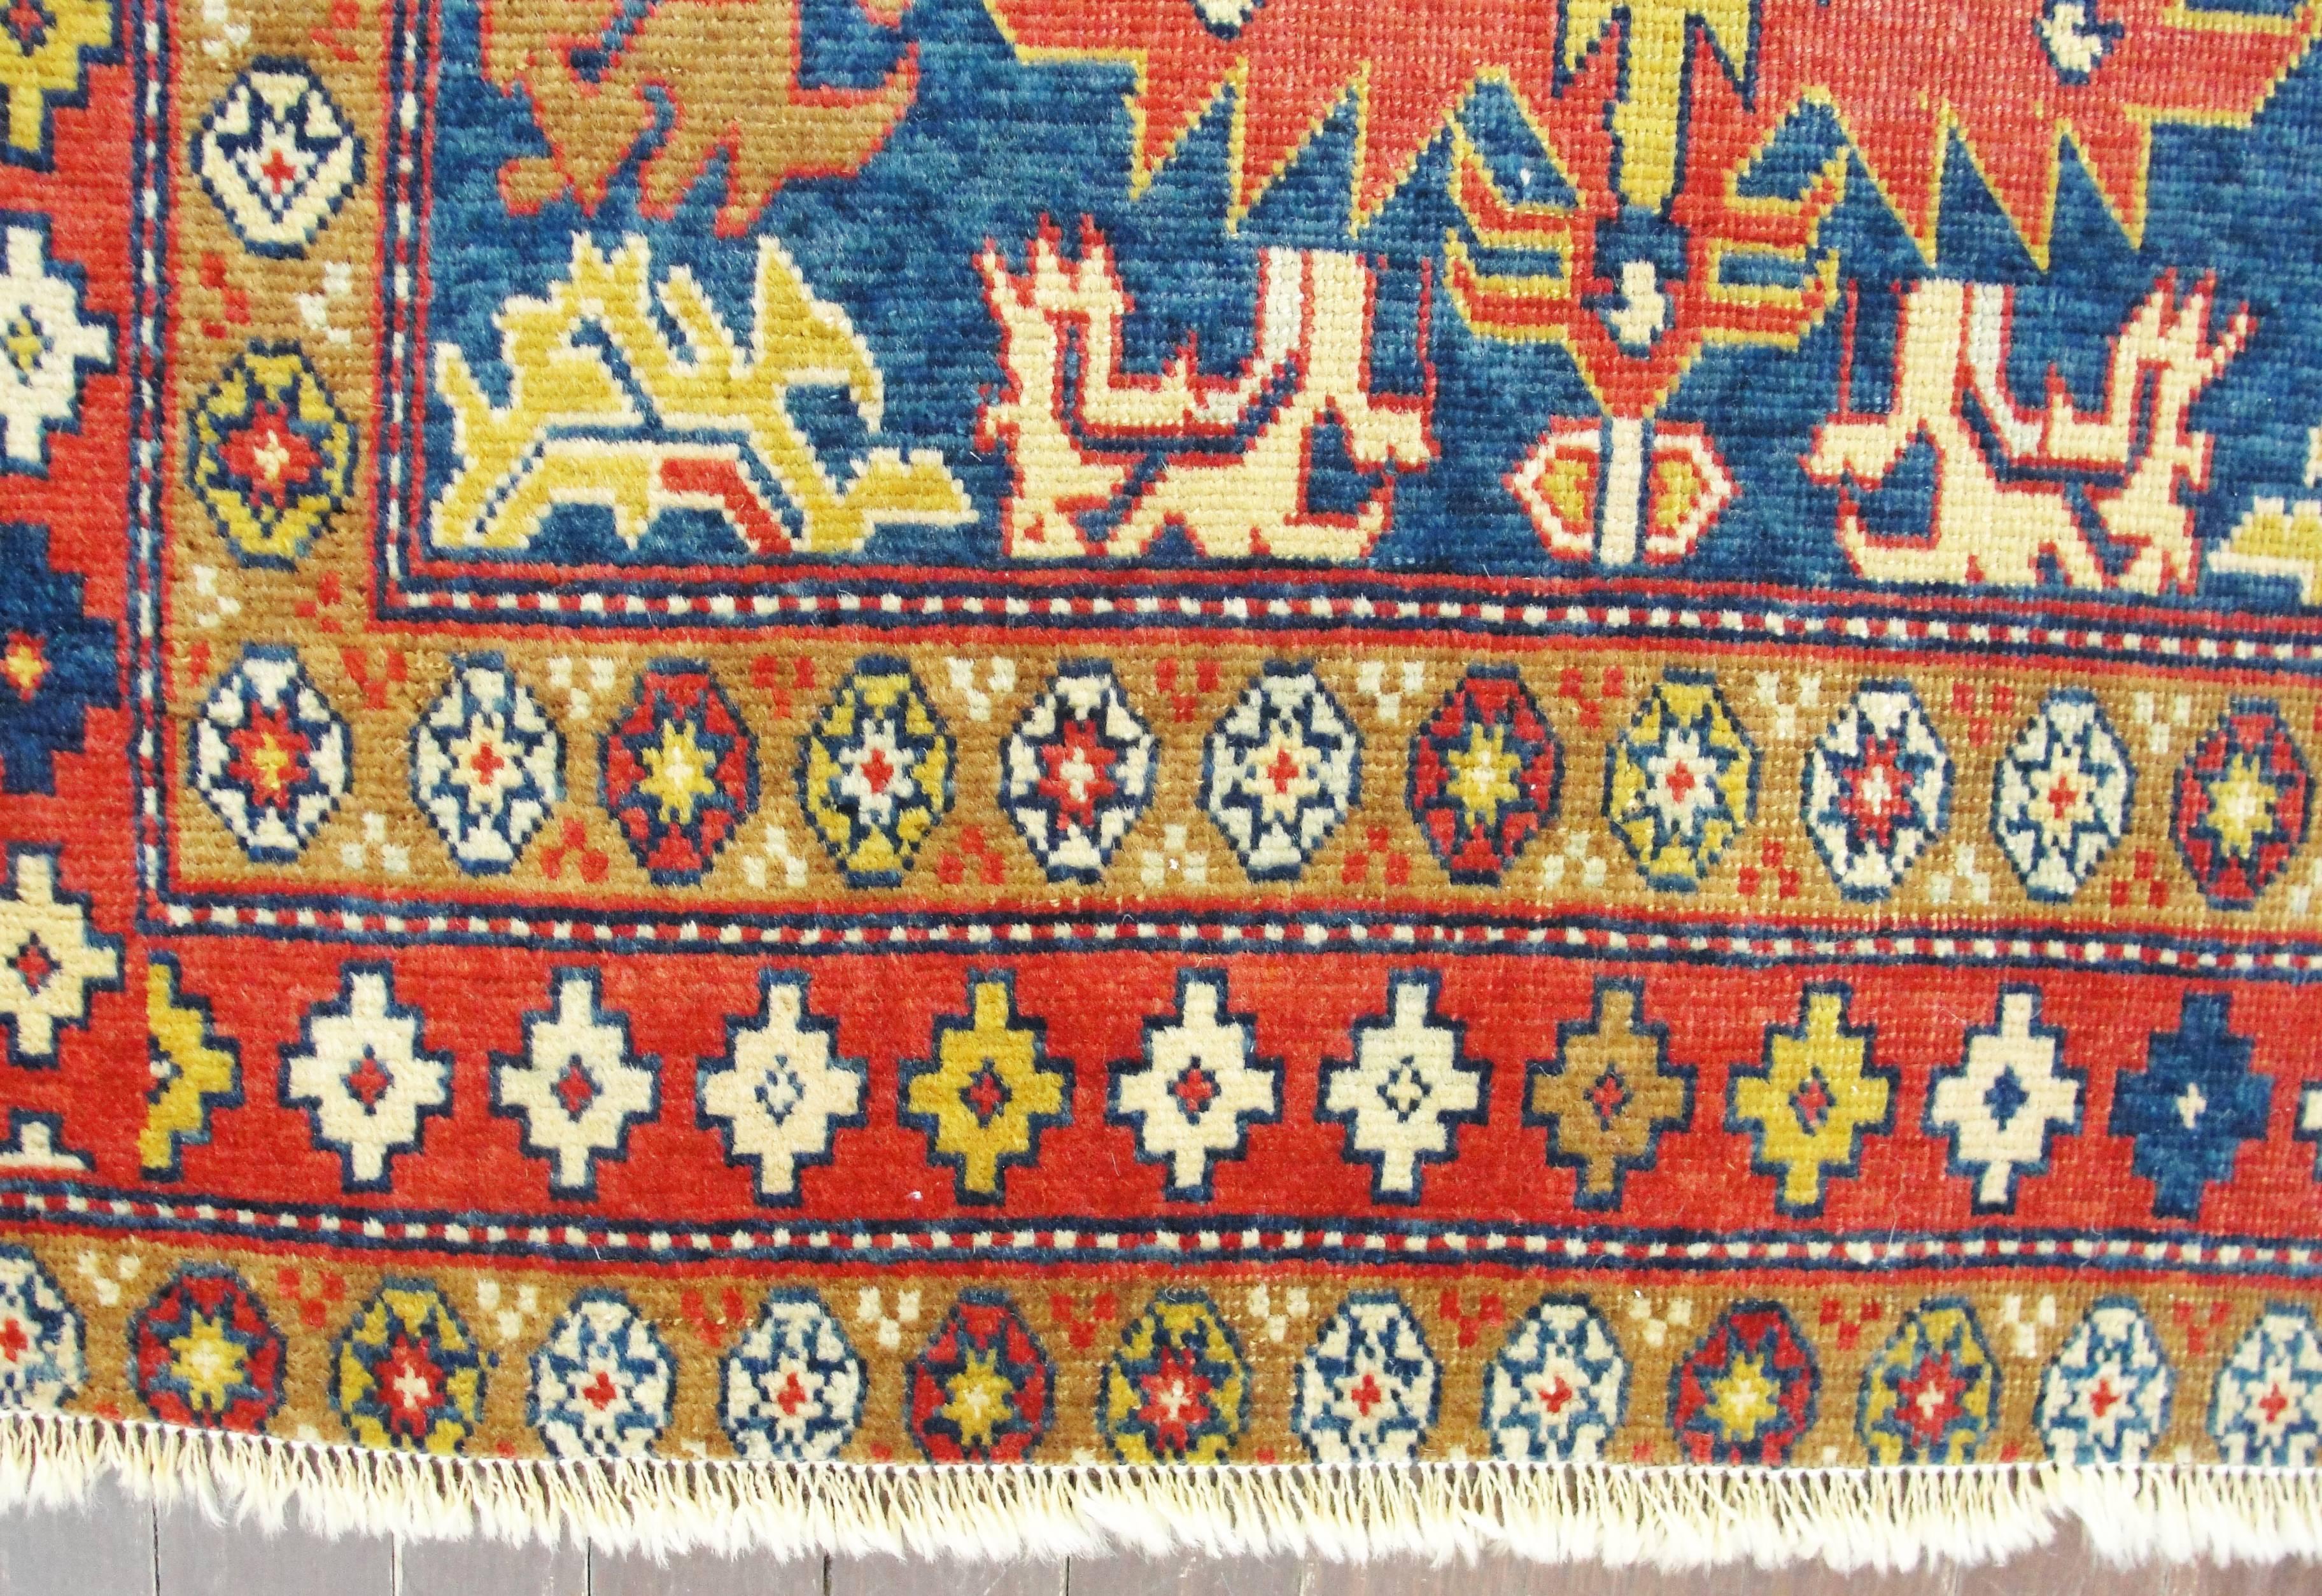 Hand-Knotted Unusual Caucasian Rug